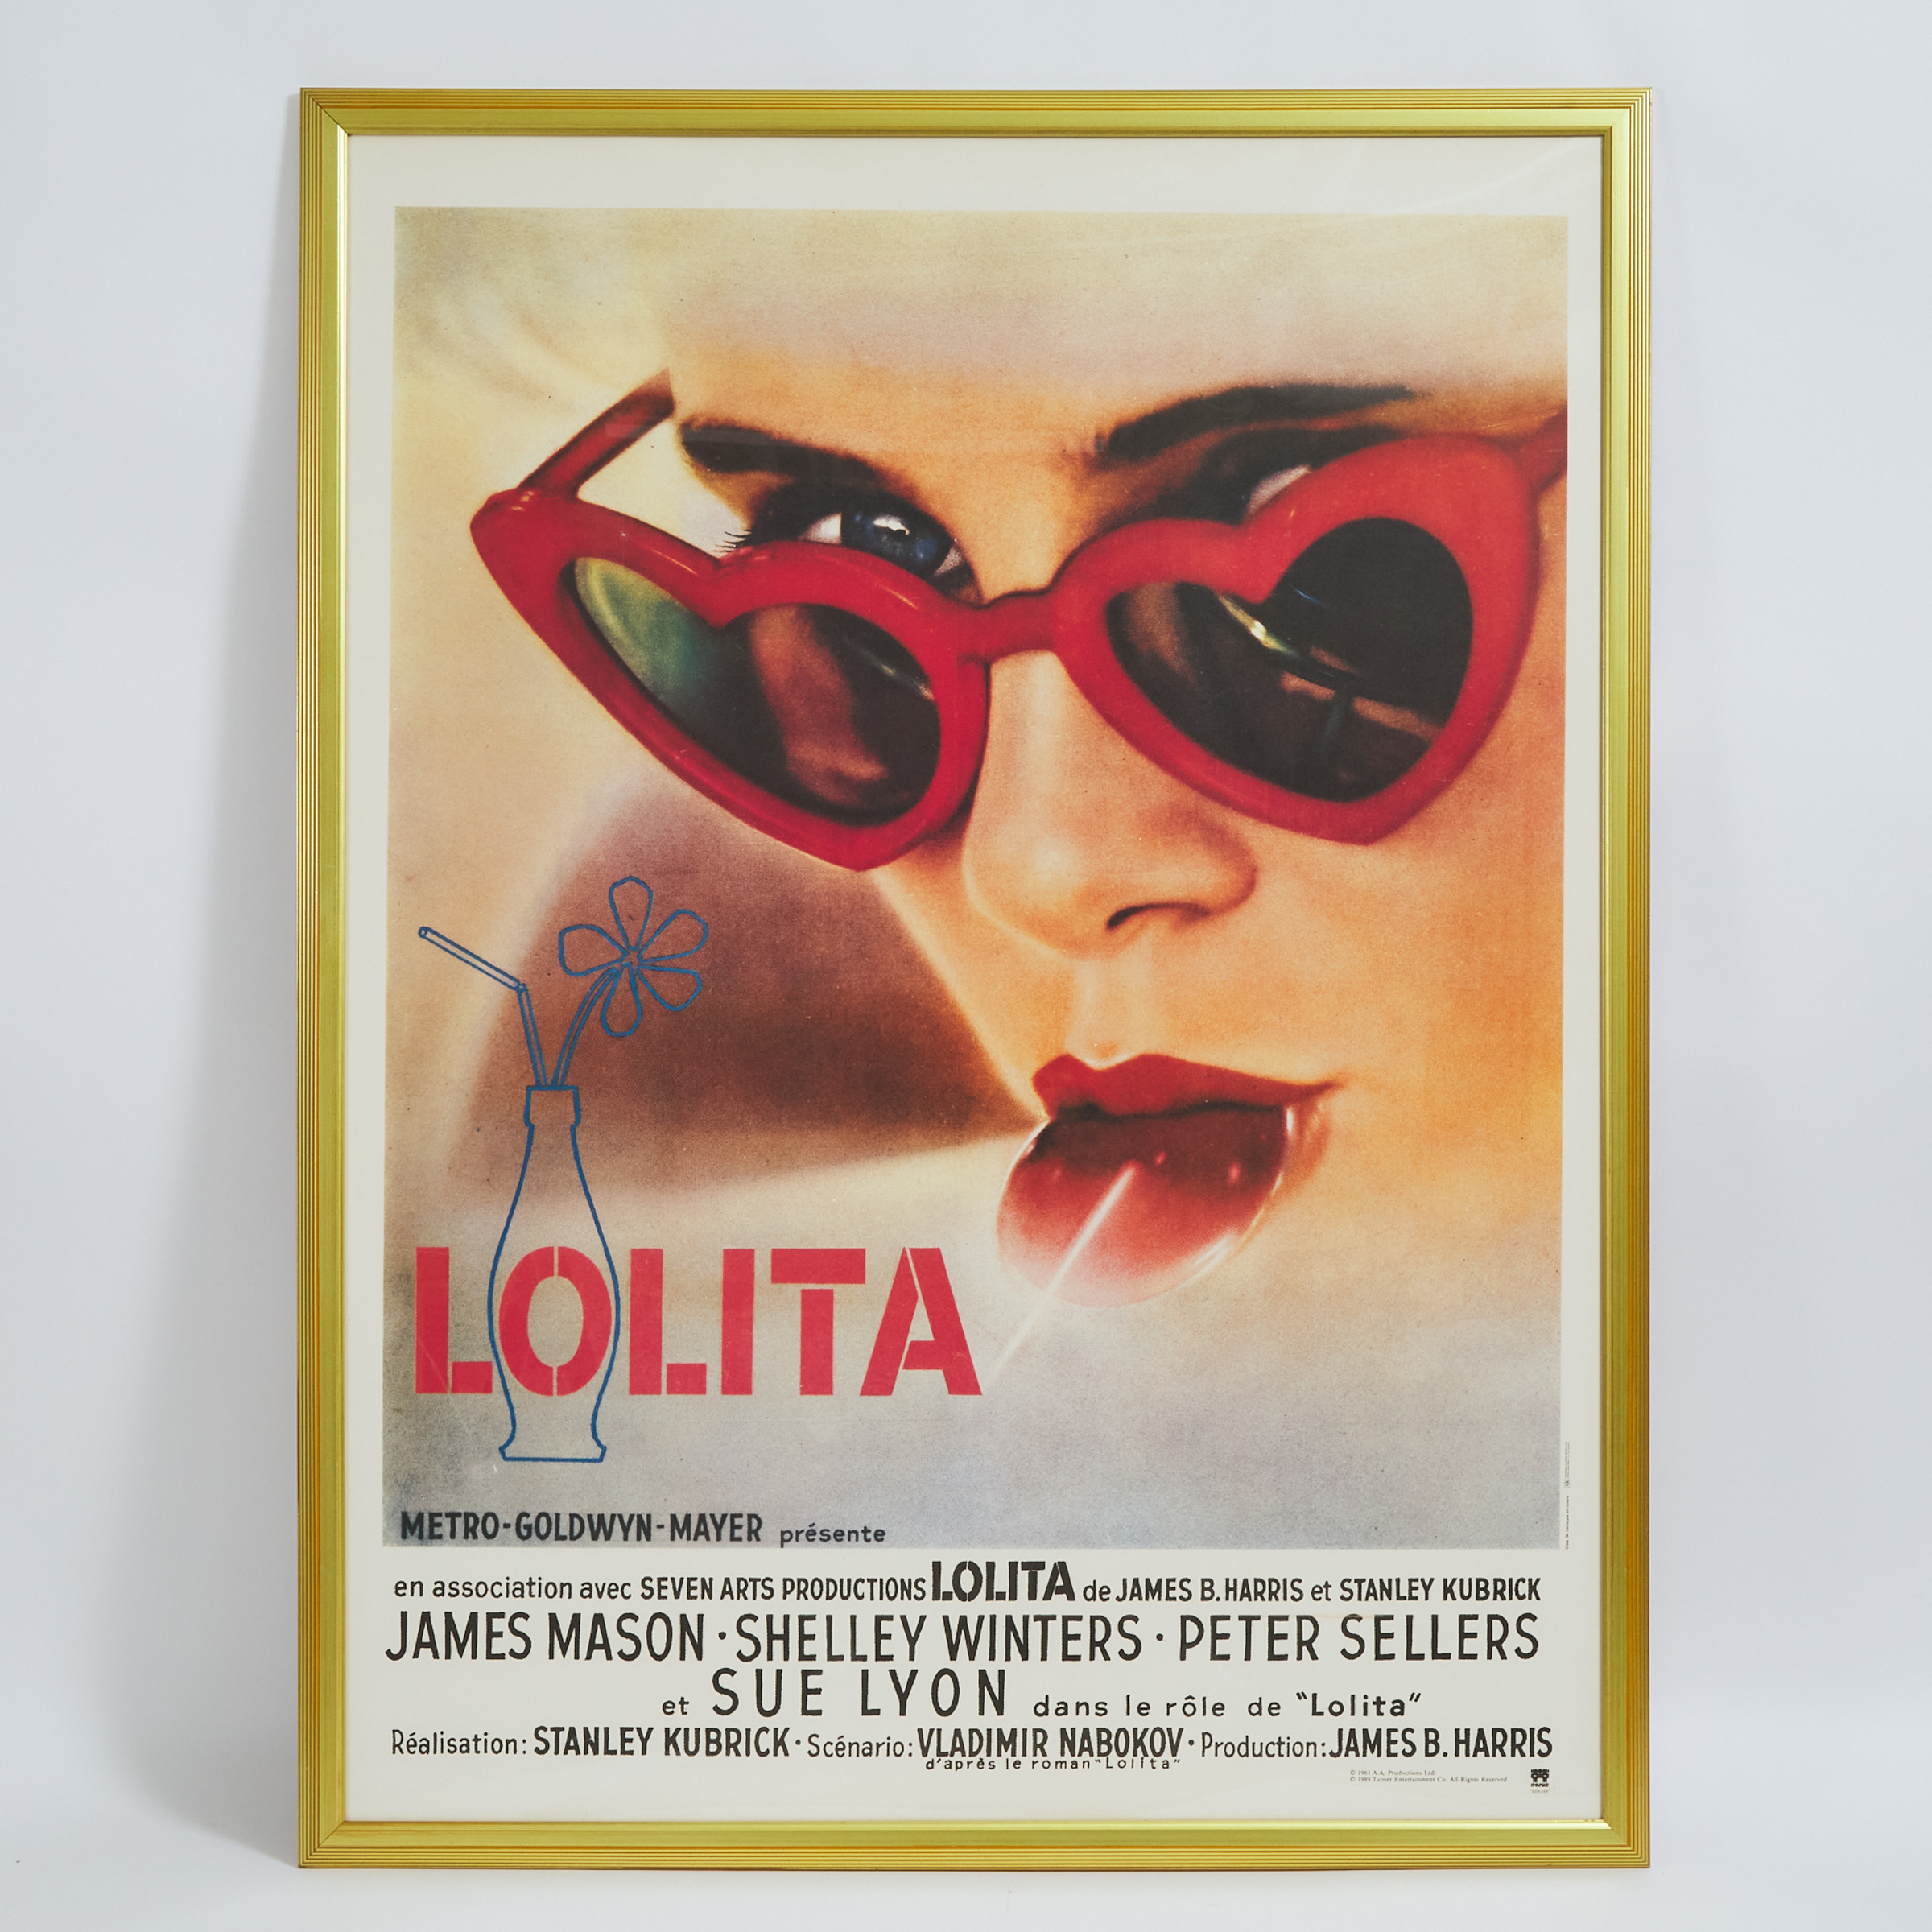 French Grande Poster for Stanley Kubrick's Film LOLITA (1962), 1989 release